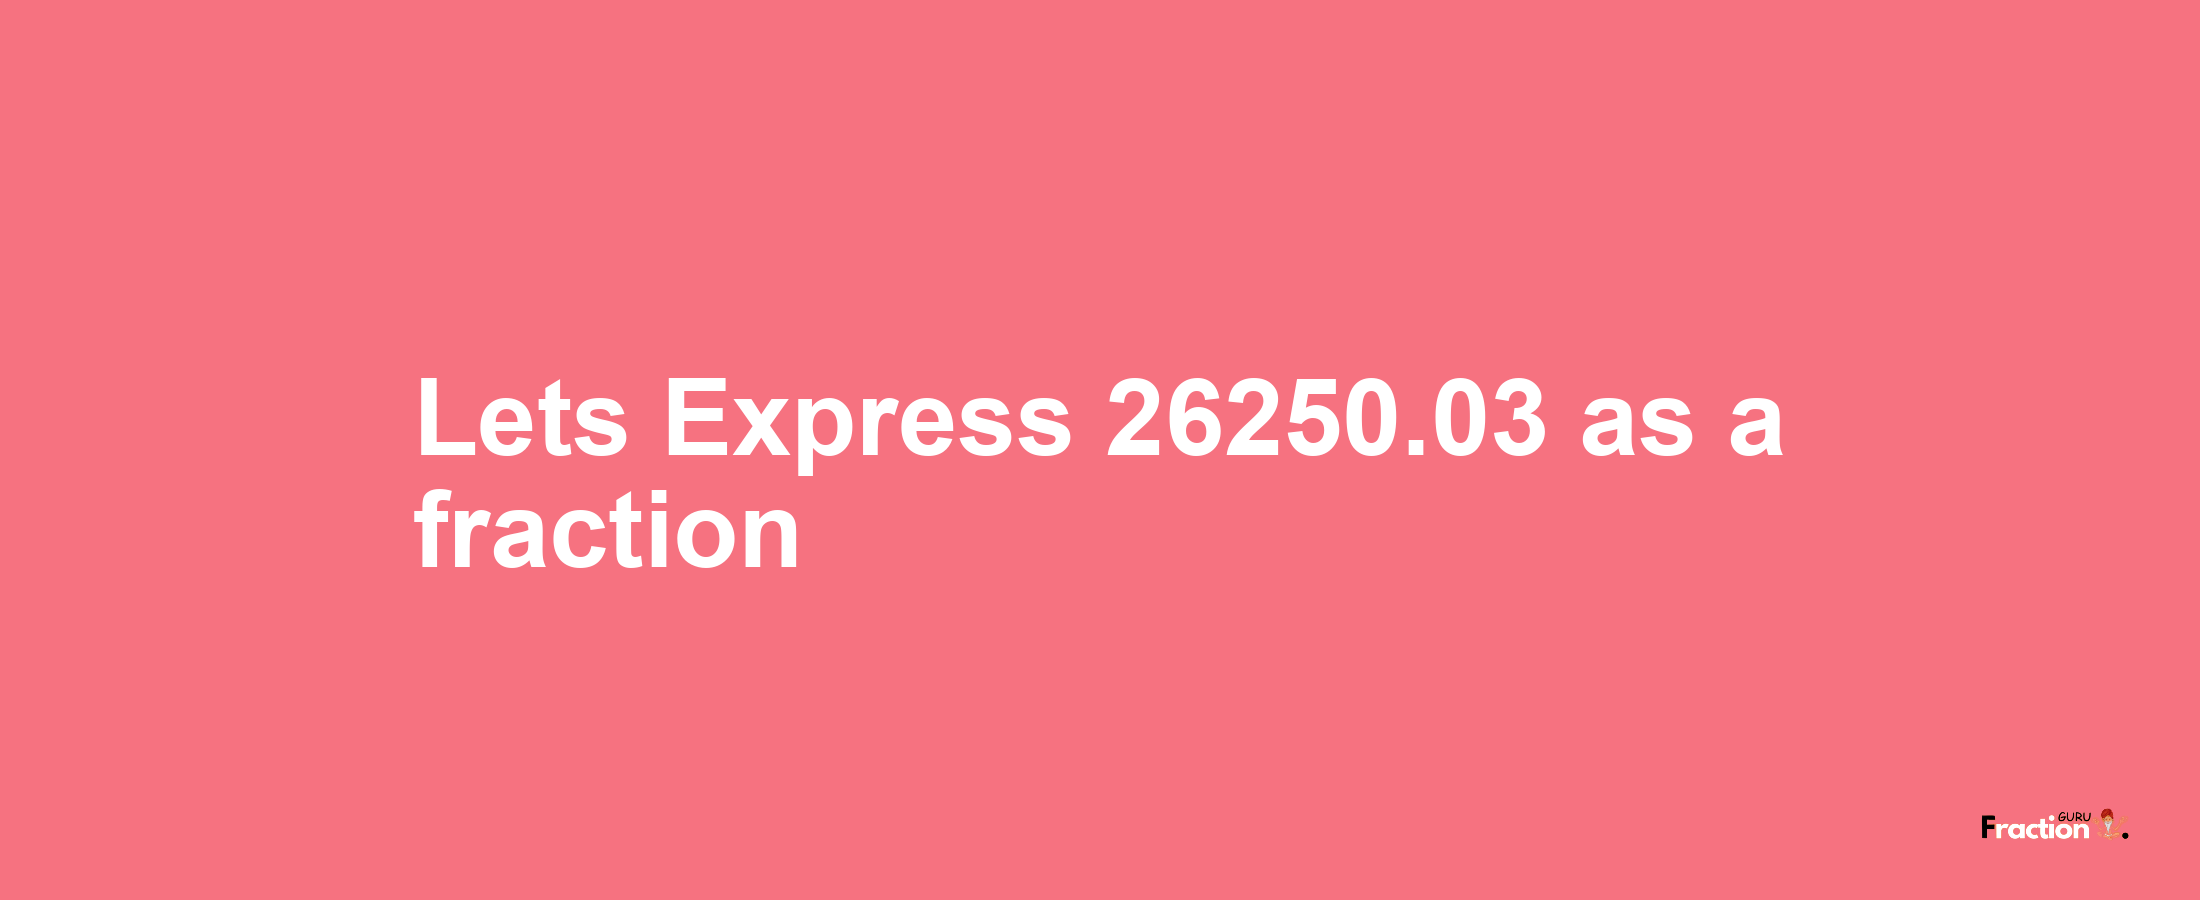 Lets Express 26250.03 as afraction